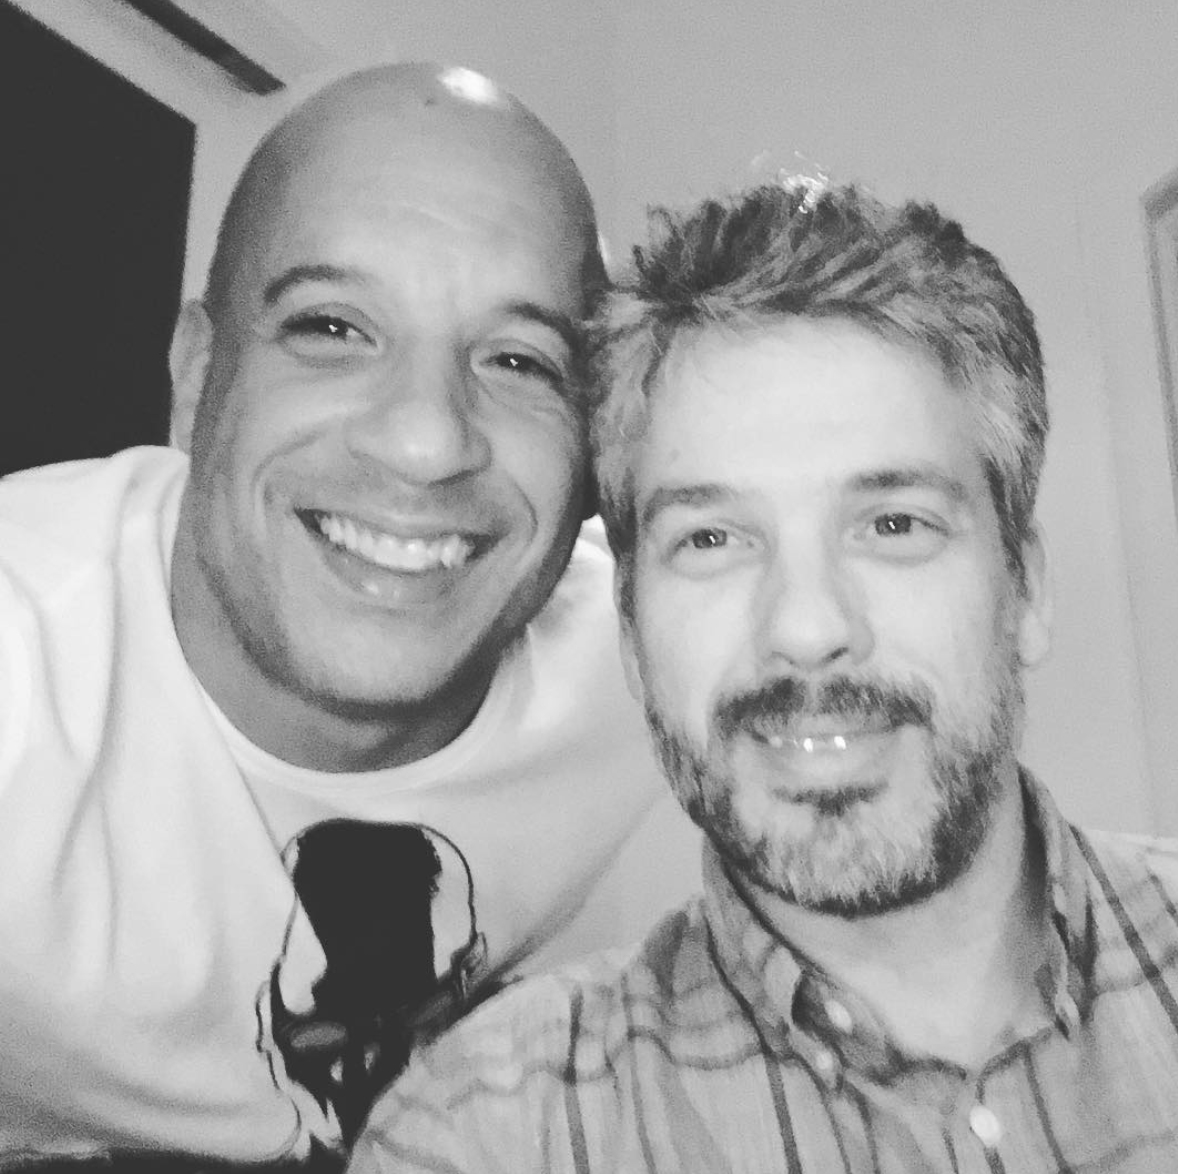 Vin Diesel and his fraternal twin brother were born in Alameda County, California